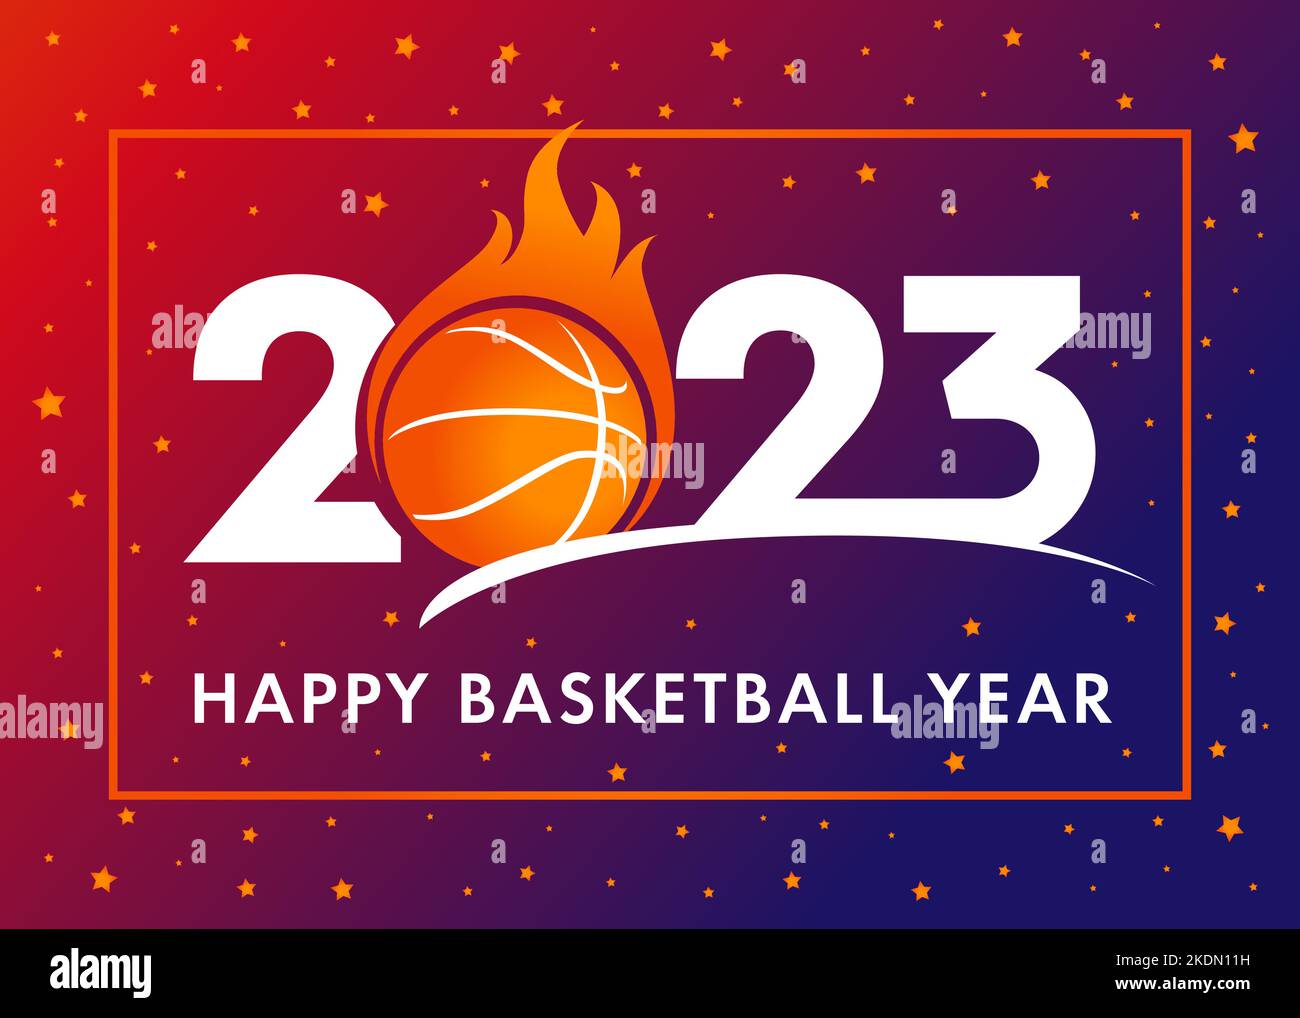 Happy Basketball Year 2023. Sport cover background logo 2023 with ball in fire and orange stars. Vector Illustration for tournament banner Stock Vector